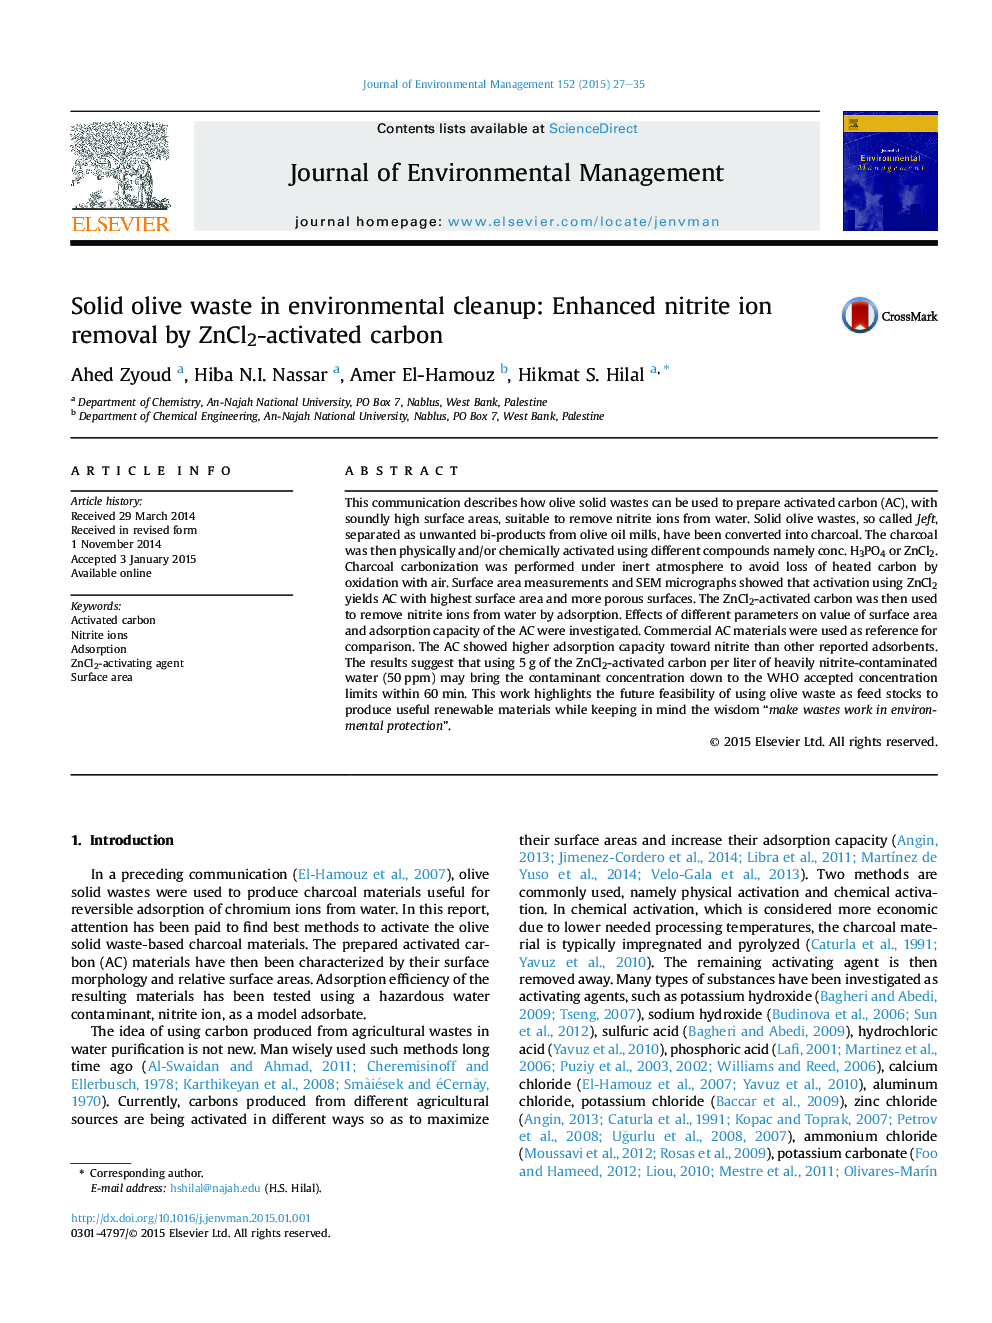 Solid olive waste in environmental cleanup: Enhanced nitrite ion removal by ZnCl2-activated carbon